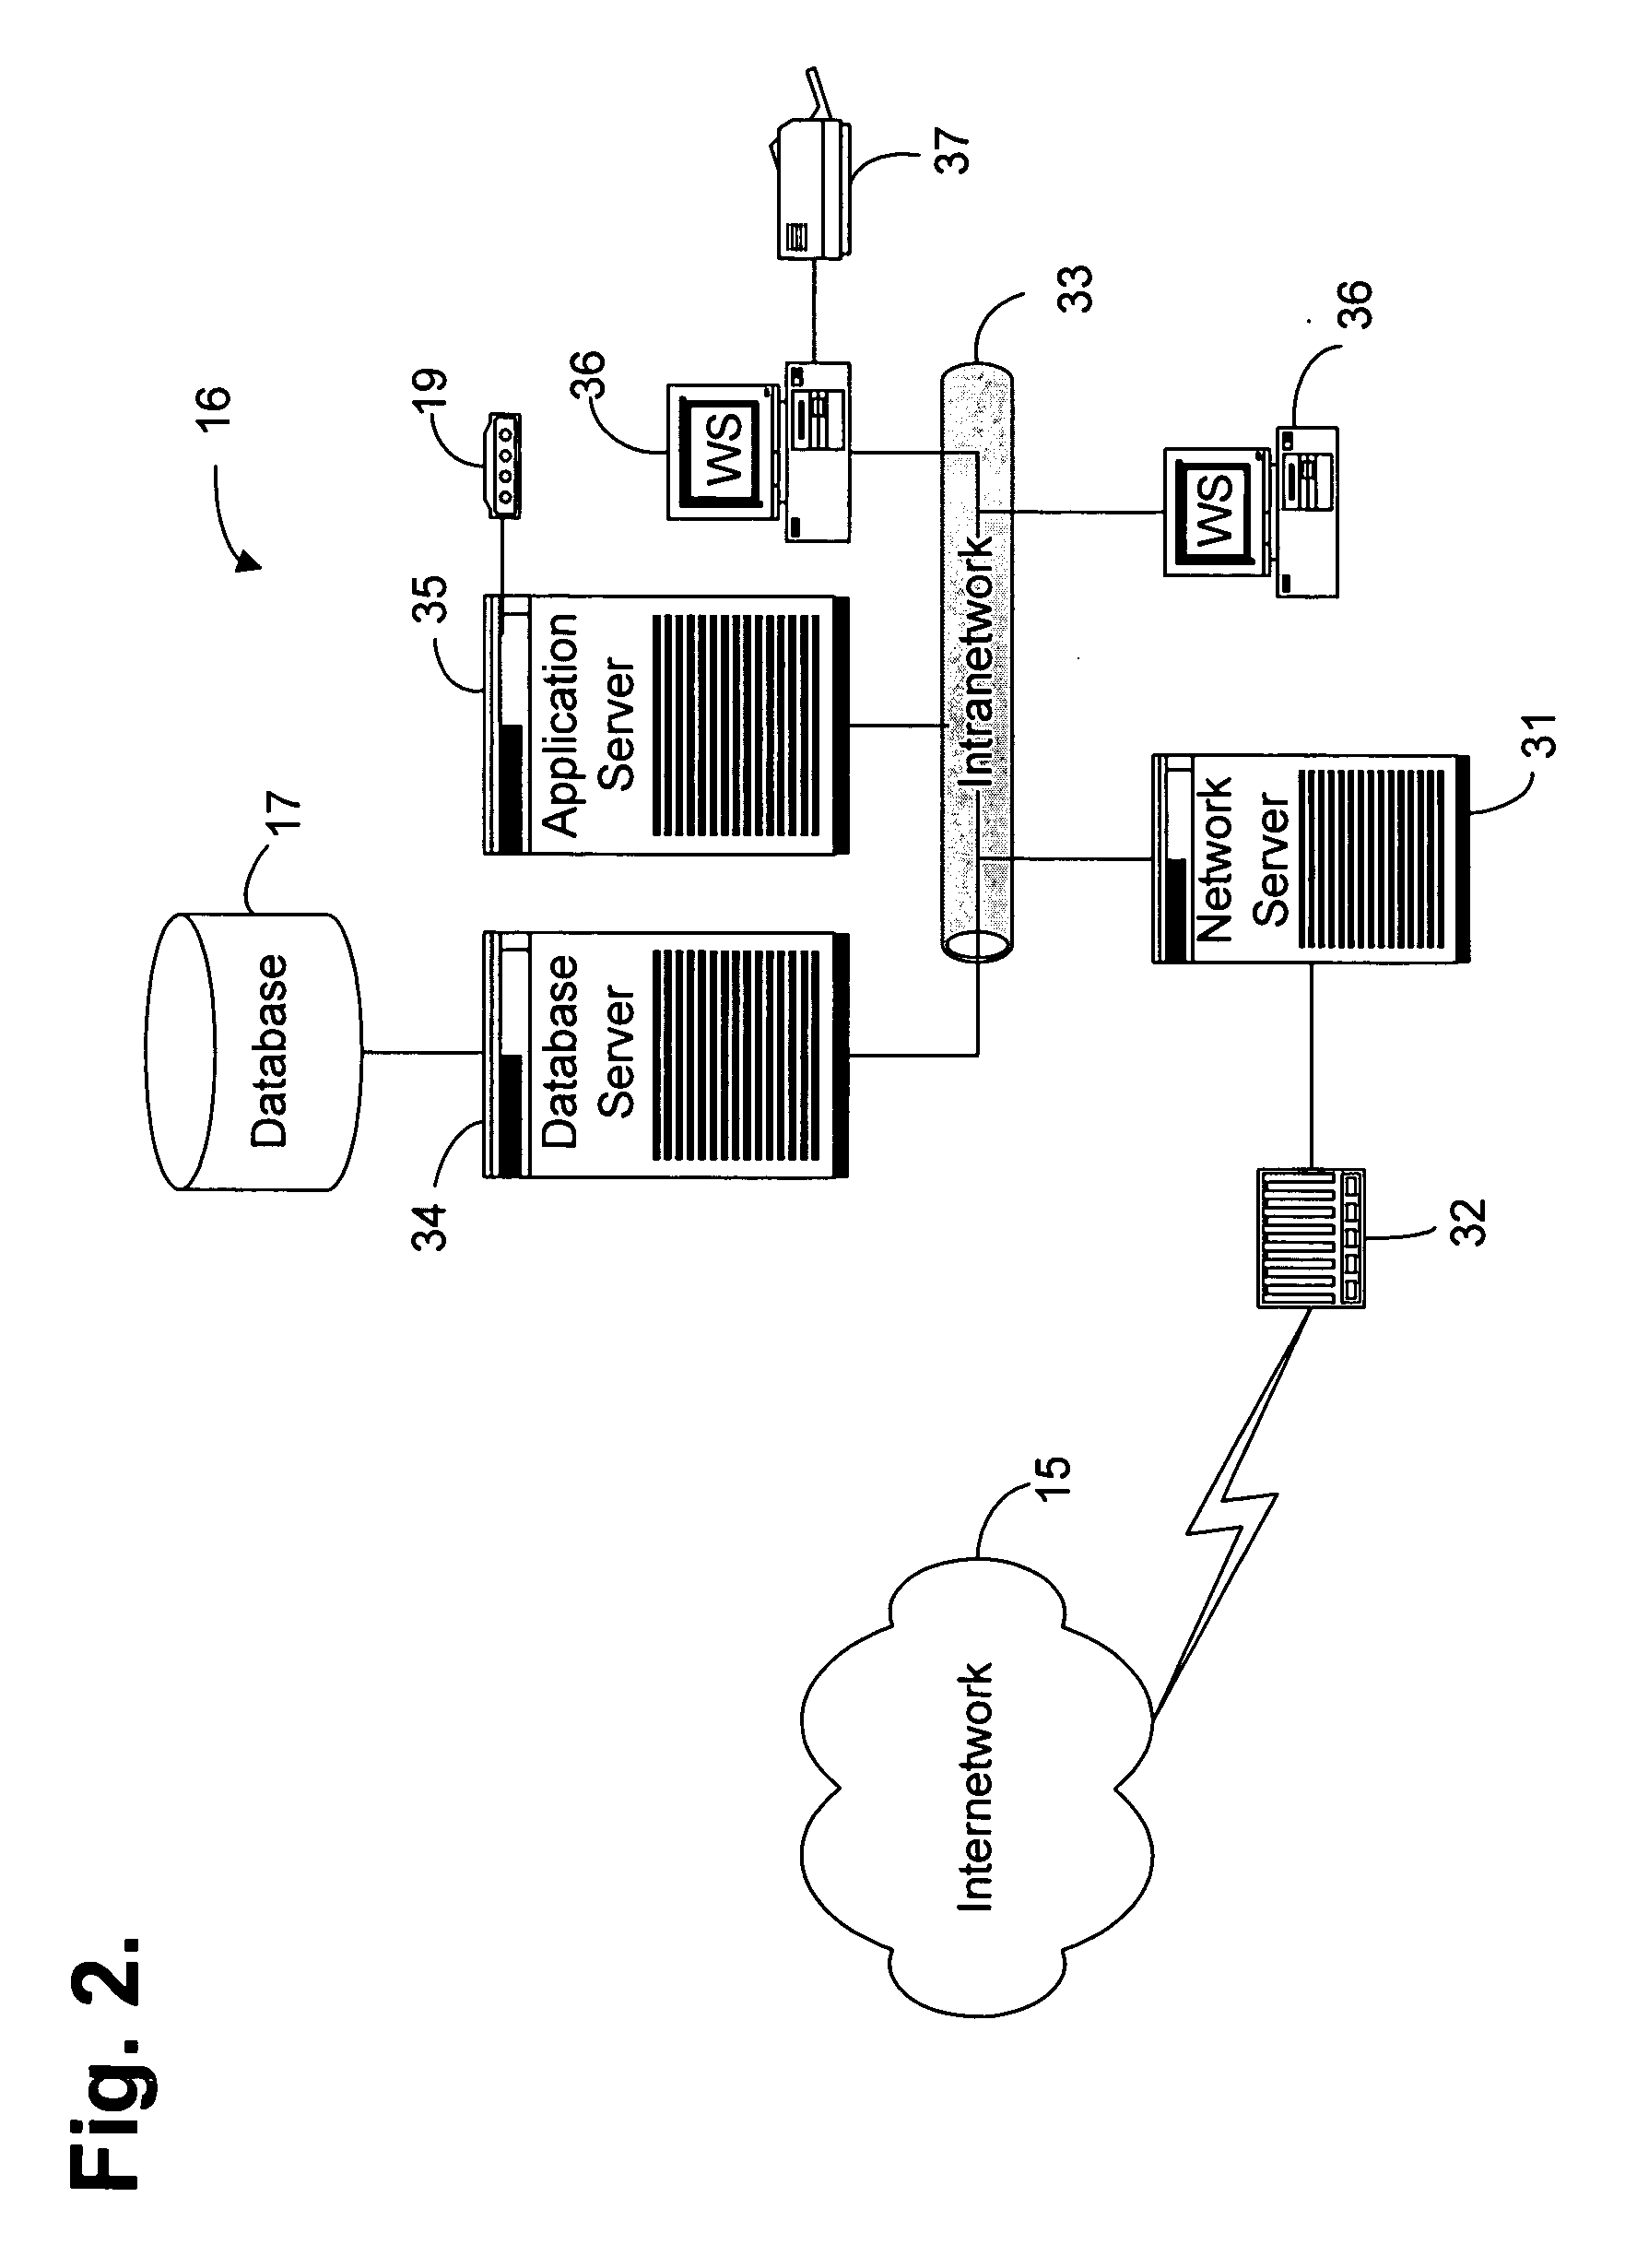 System and method for collection and analysis of patient information for automated remote patient care